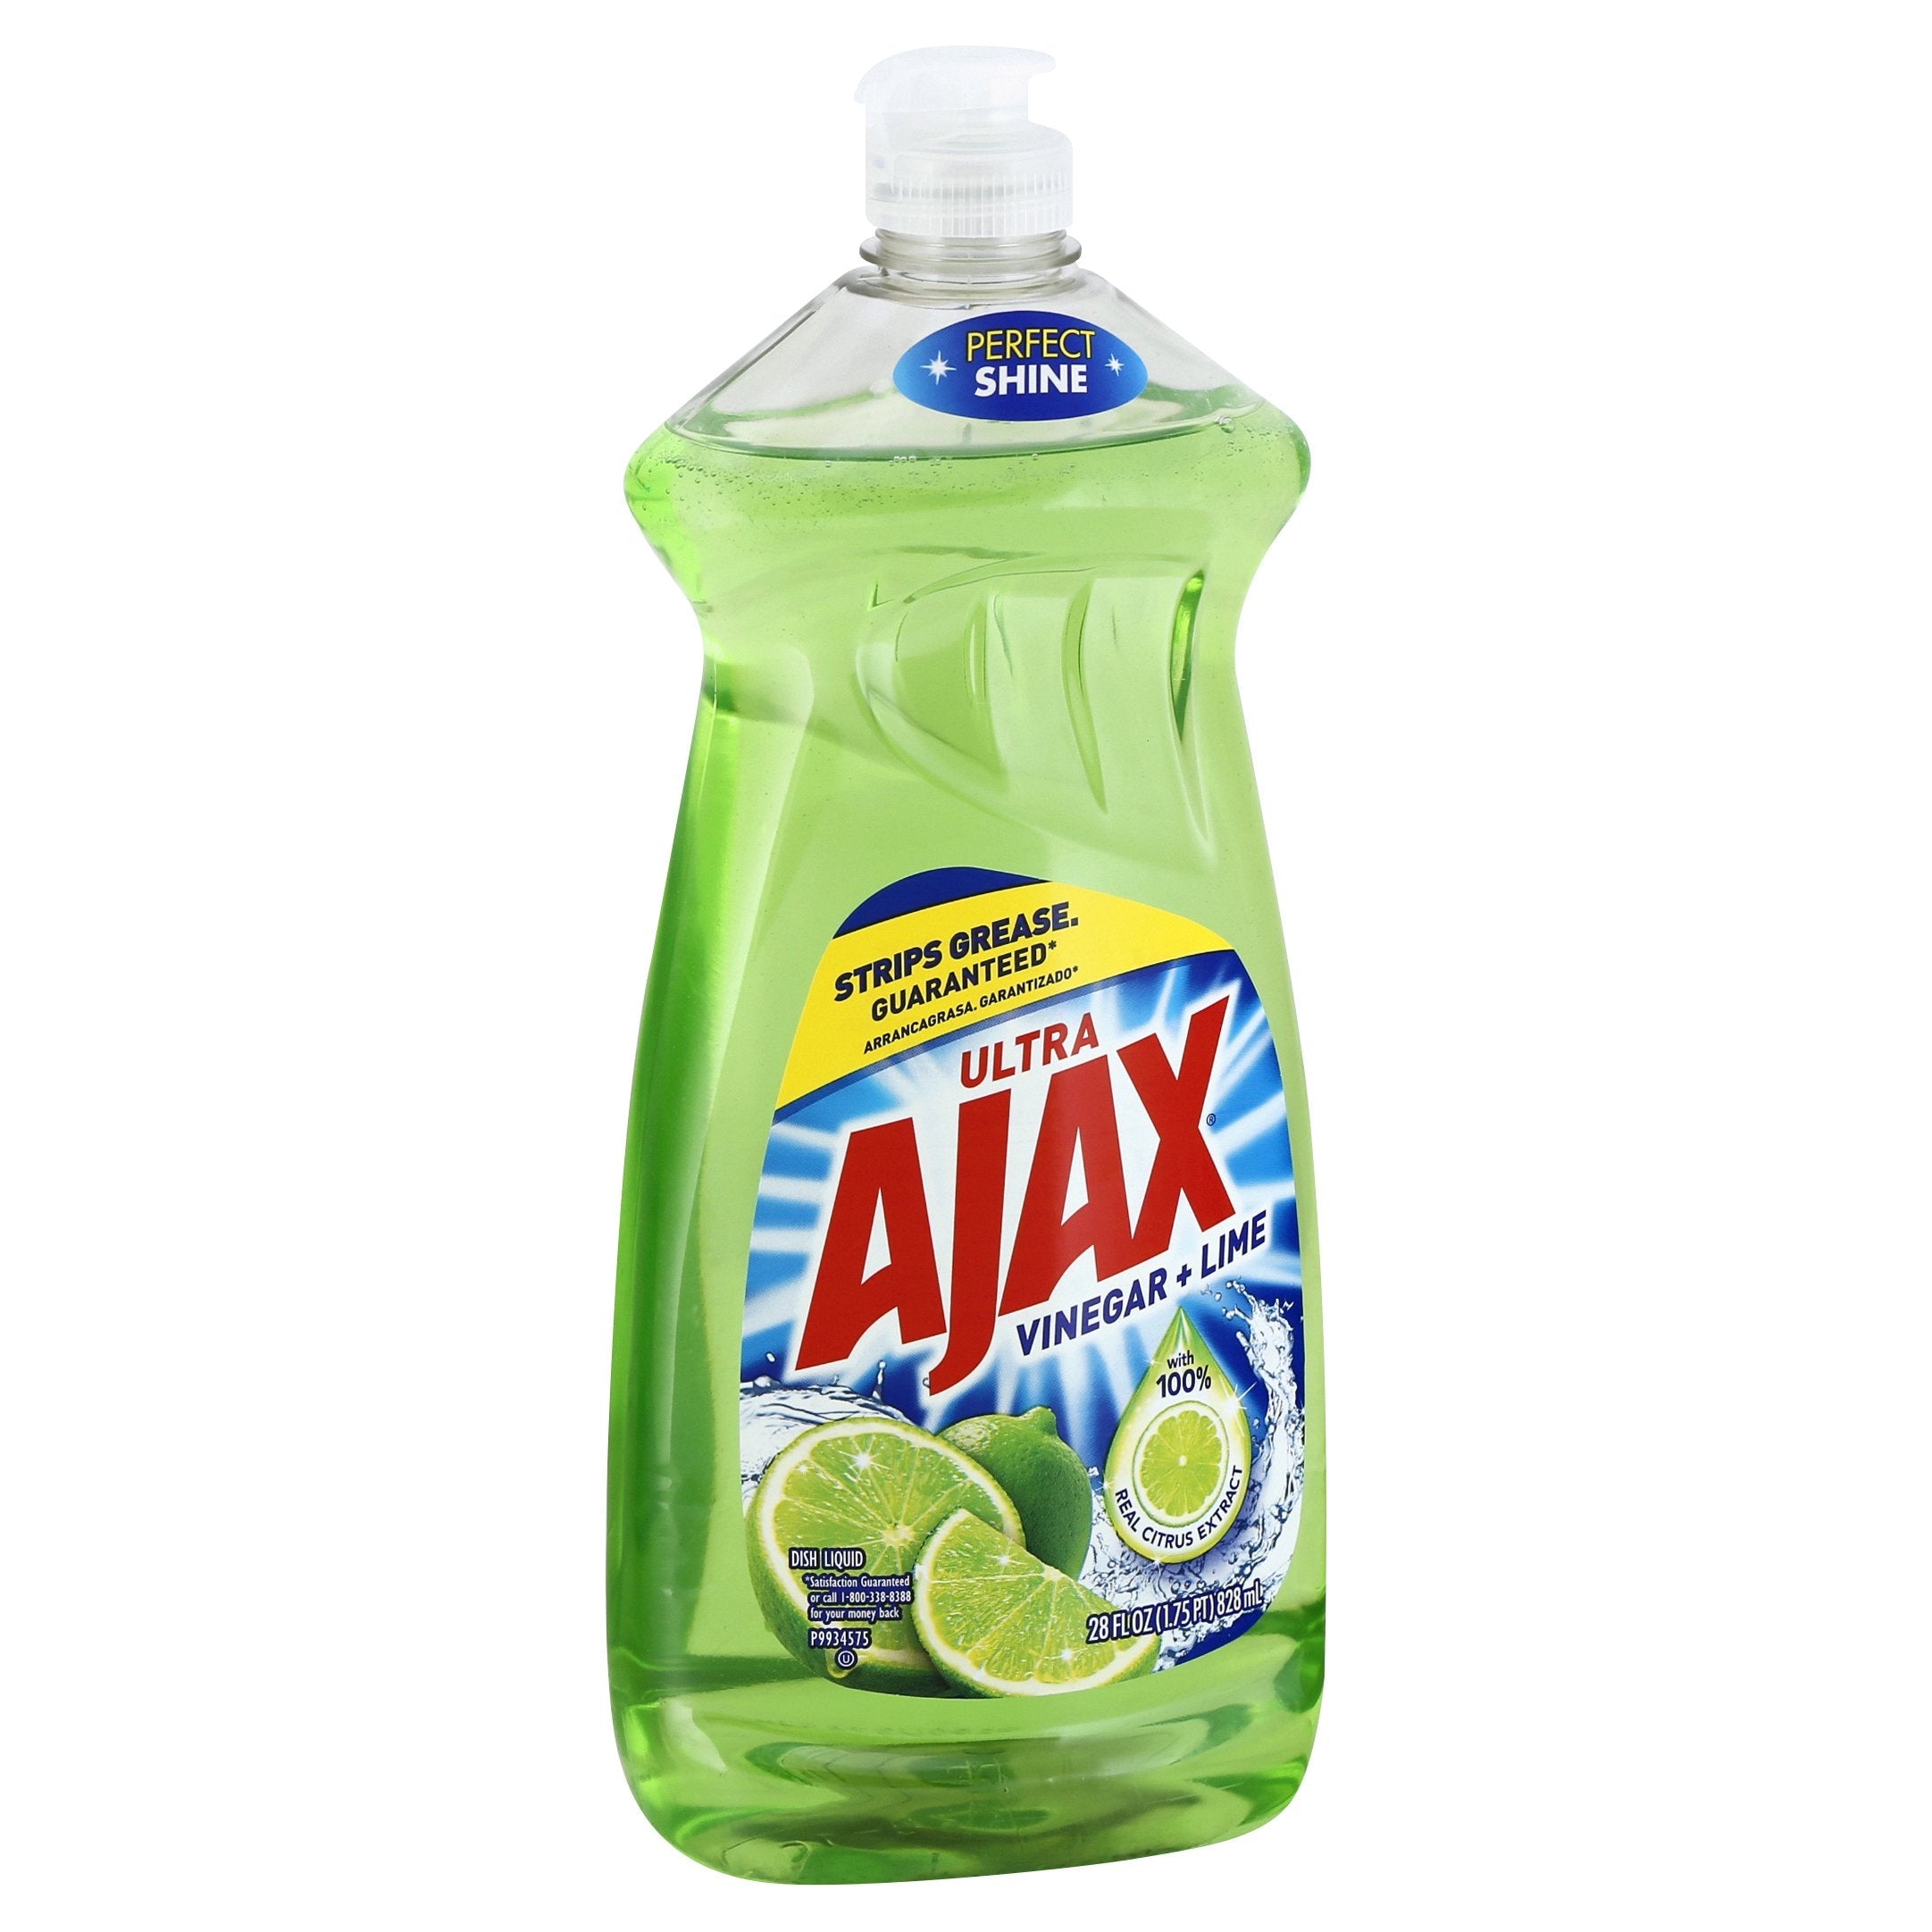 Dish Soap, lime